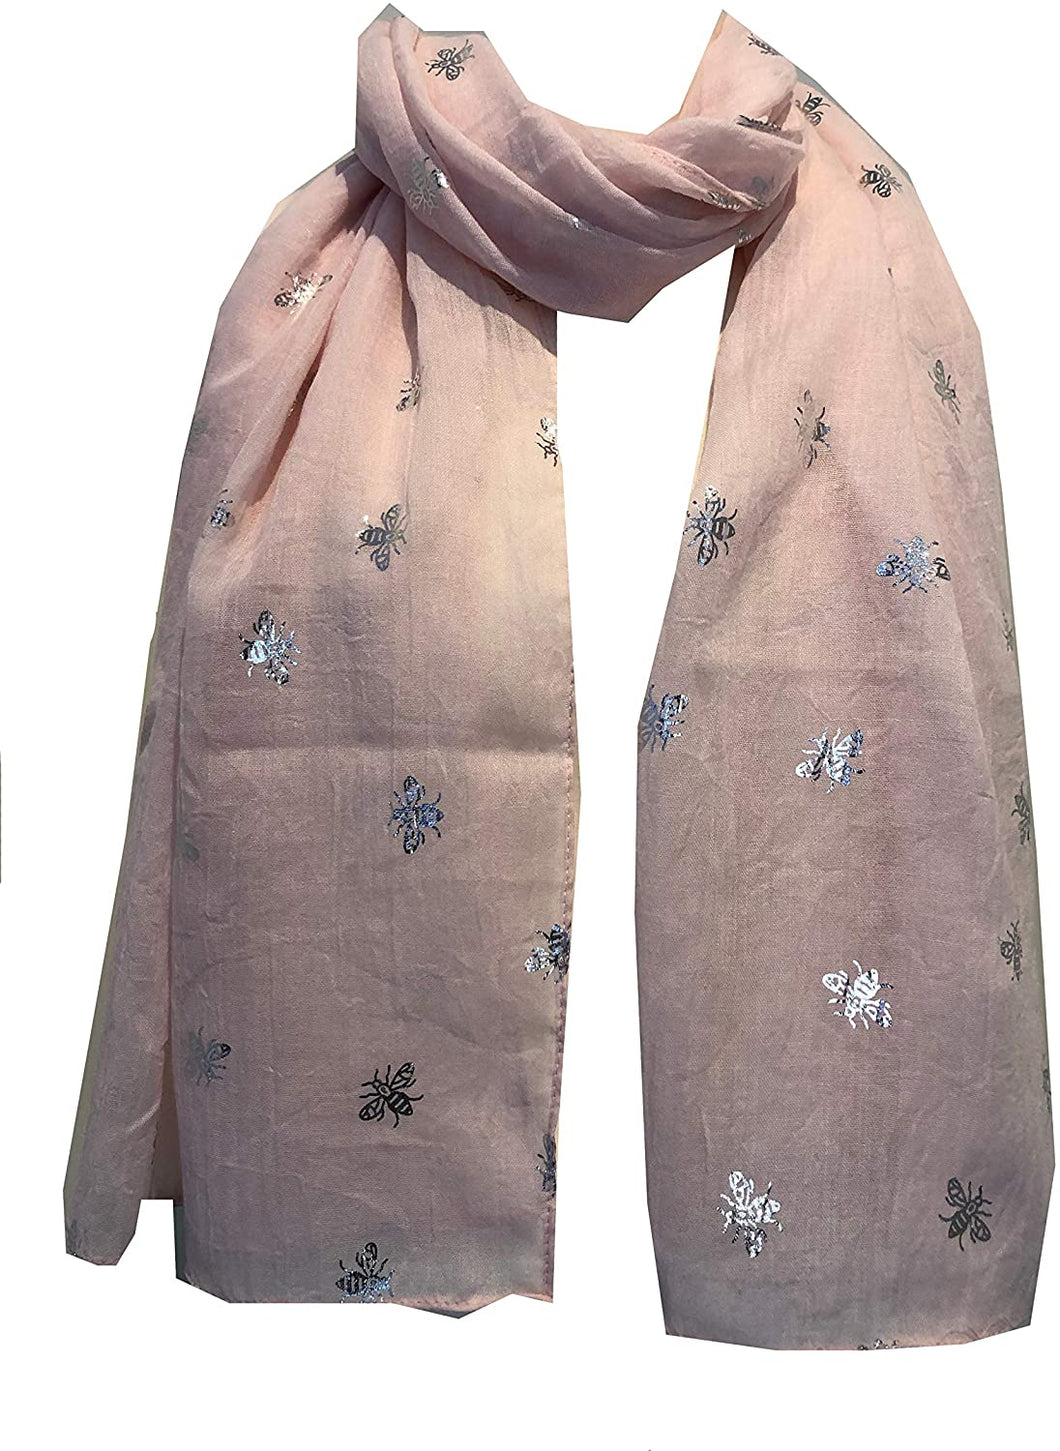 Pamper Yourself Now Baby Pink with Silver Bumble Bees Long Scarf. Great Present/Gift for bee Lovers.